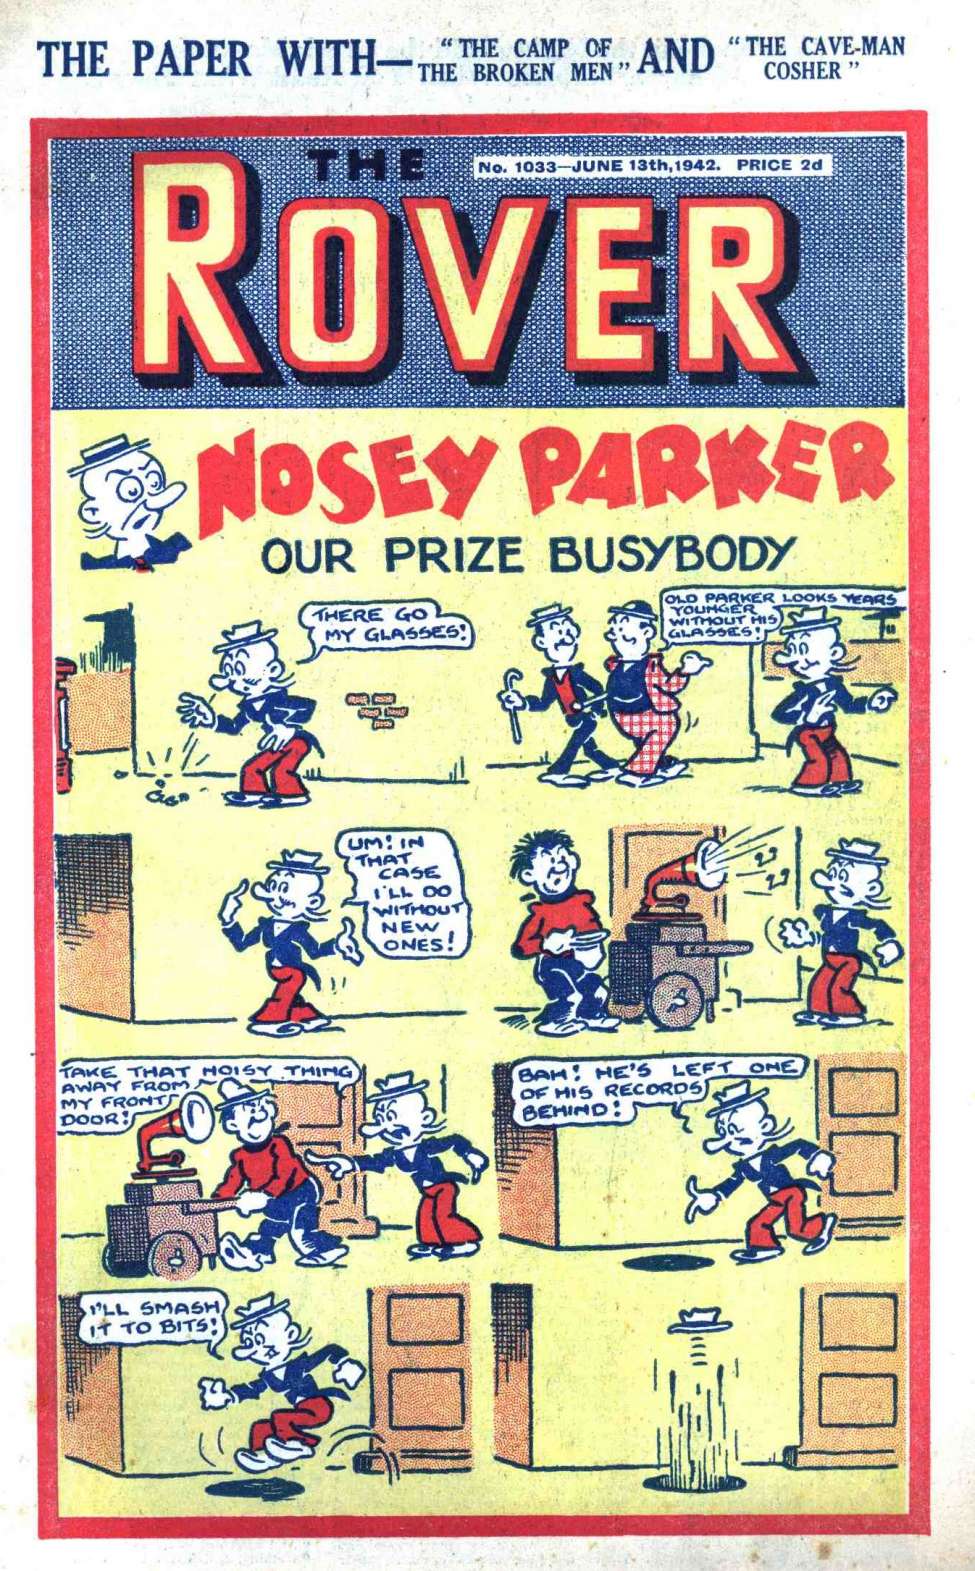 Book Cover For The Rover 1033